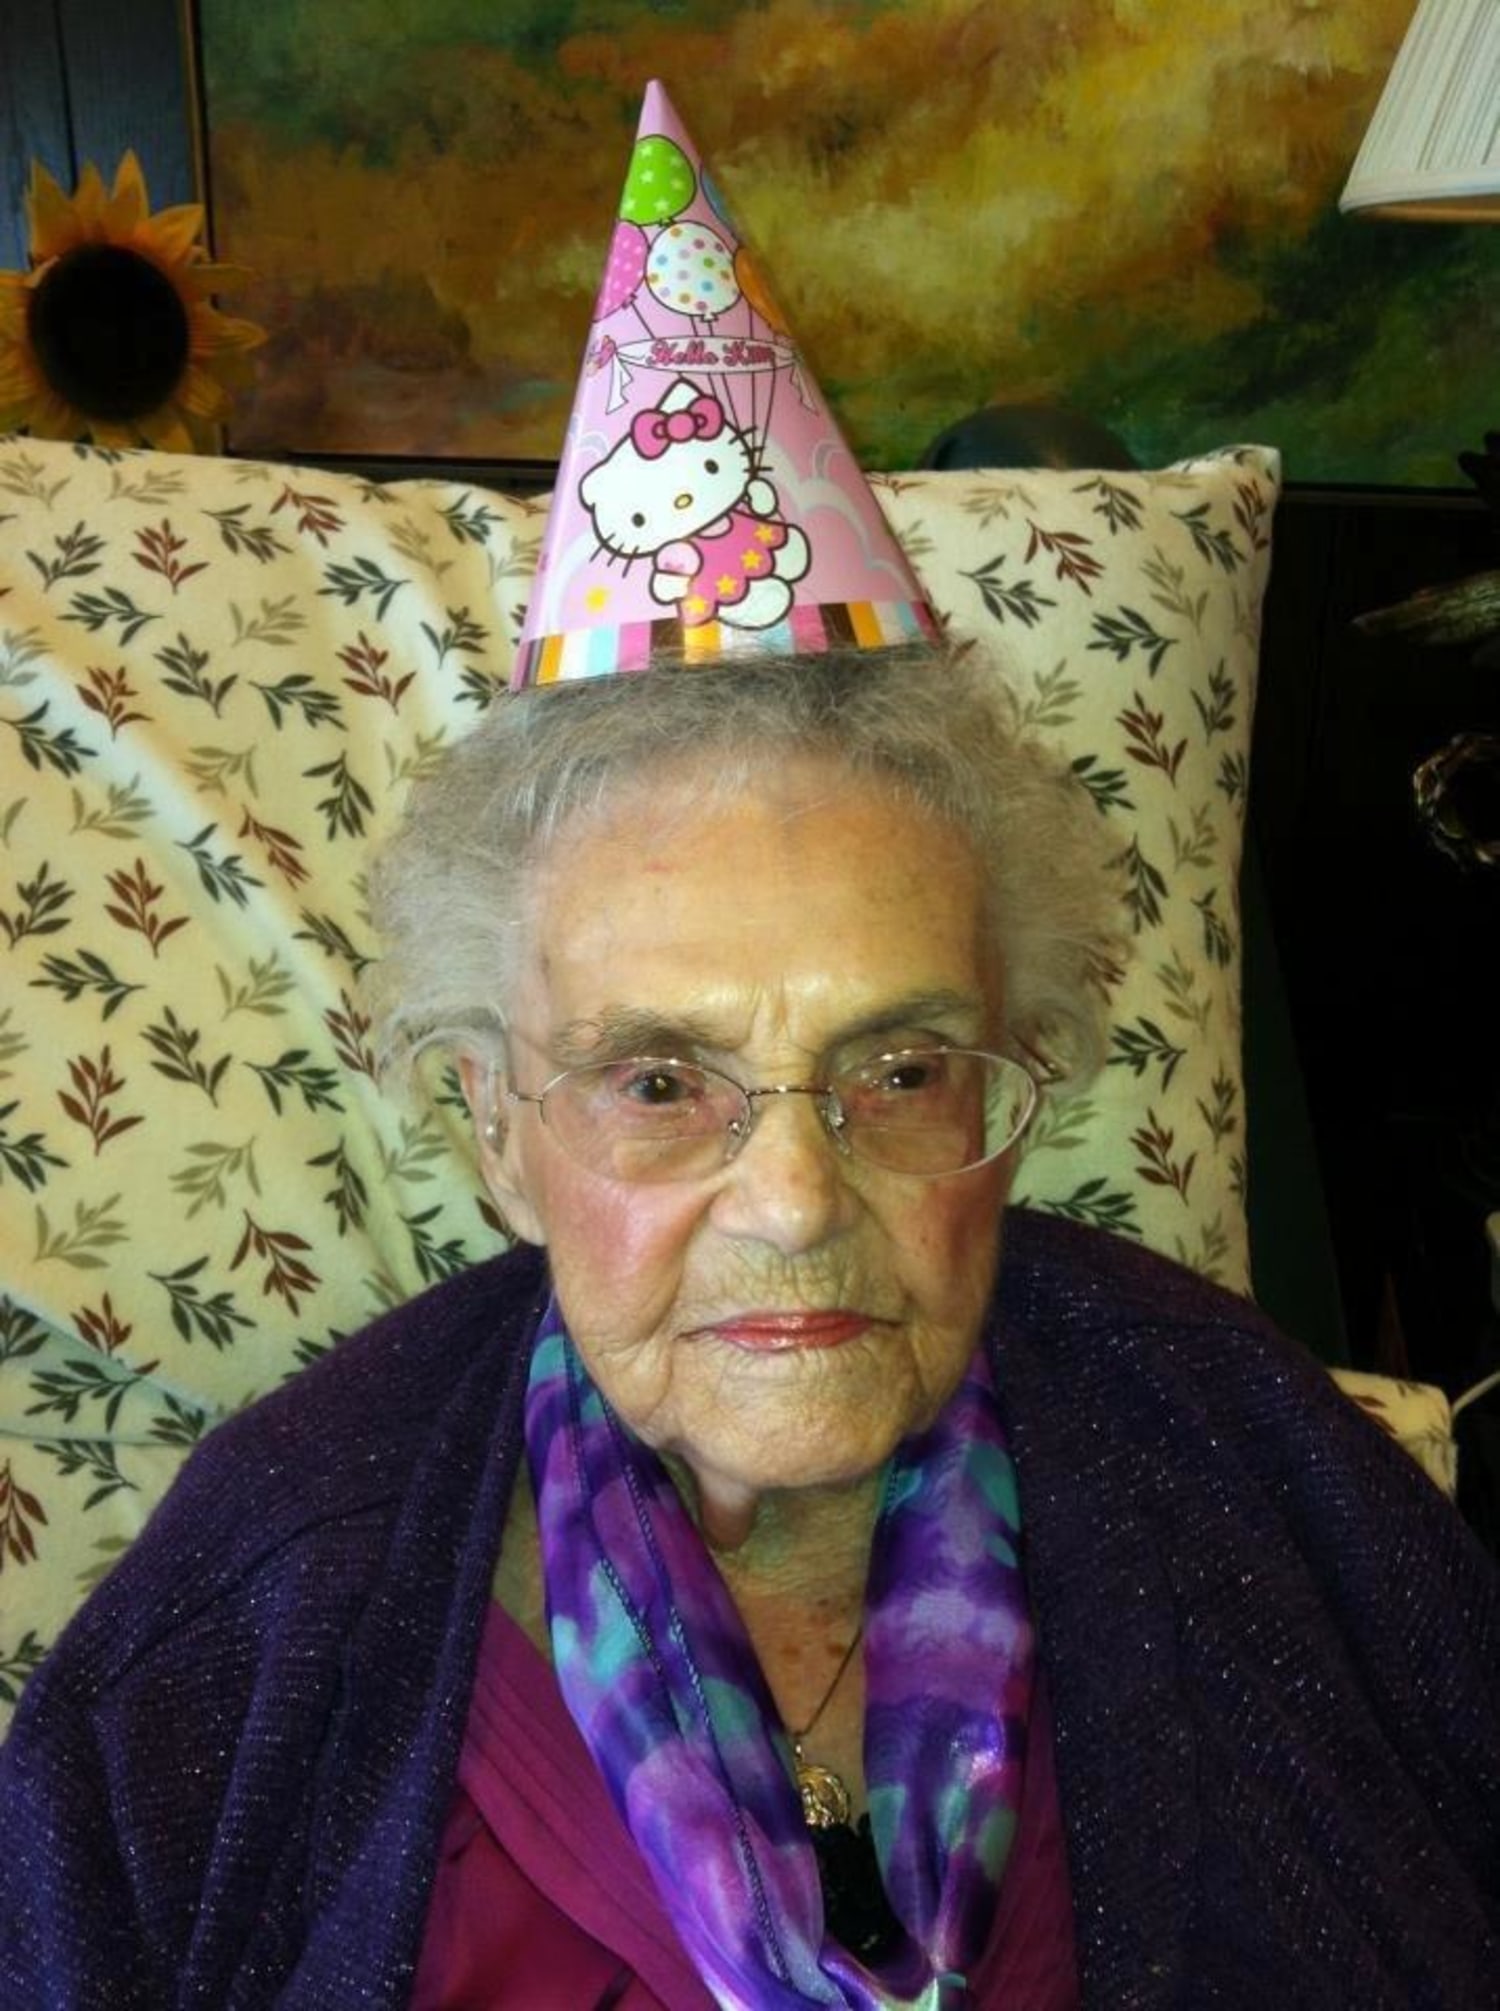 Facebook to 104-year-old grandma: Sorry we made you lie about your age